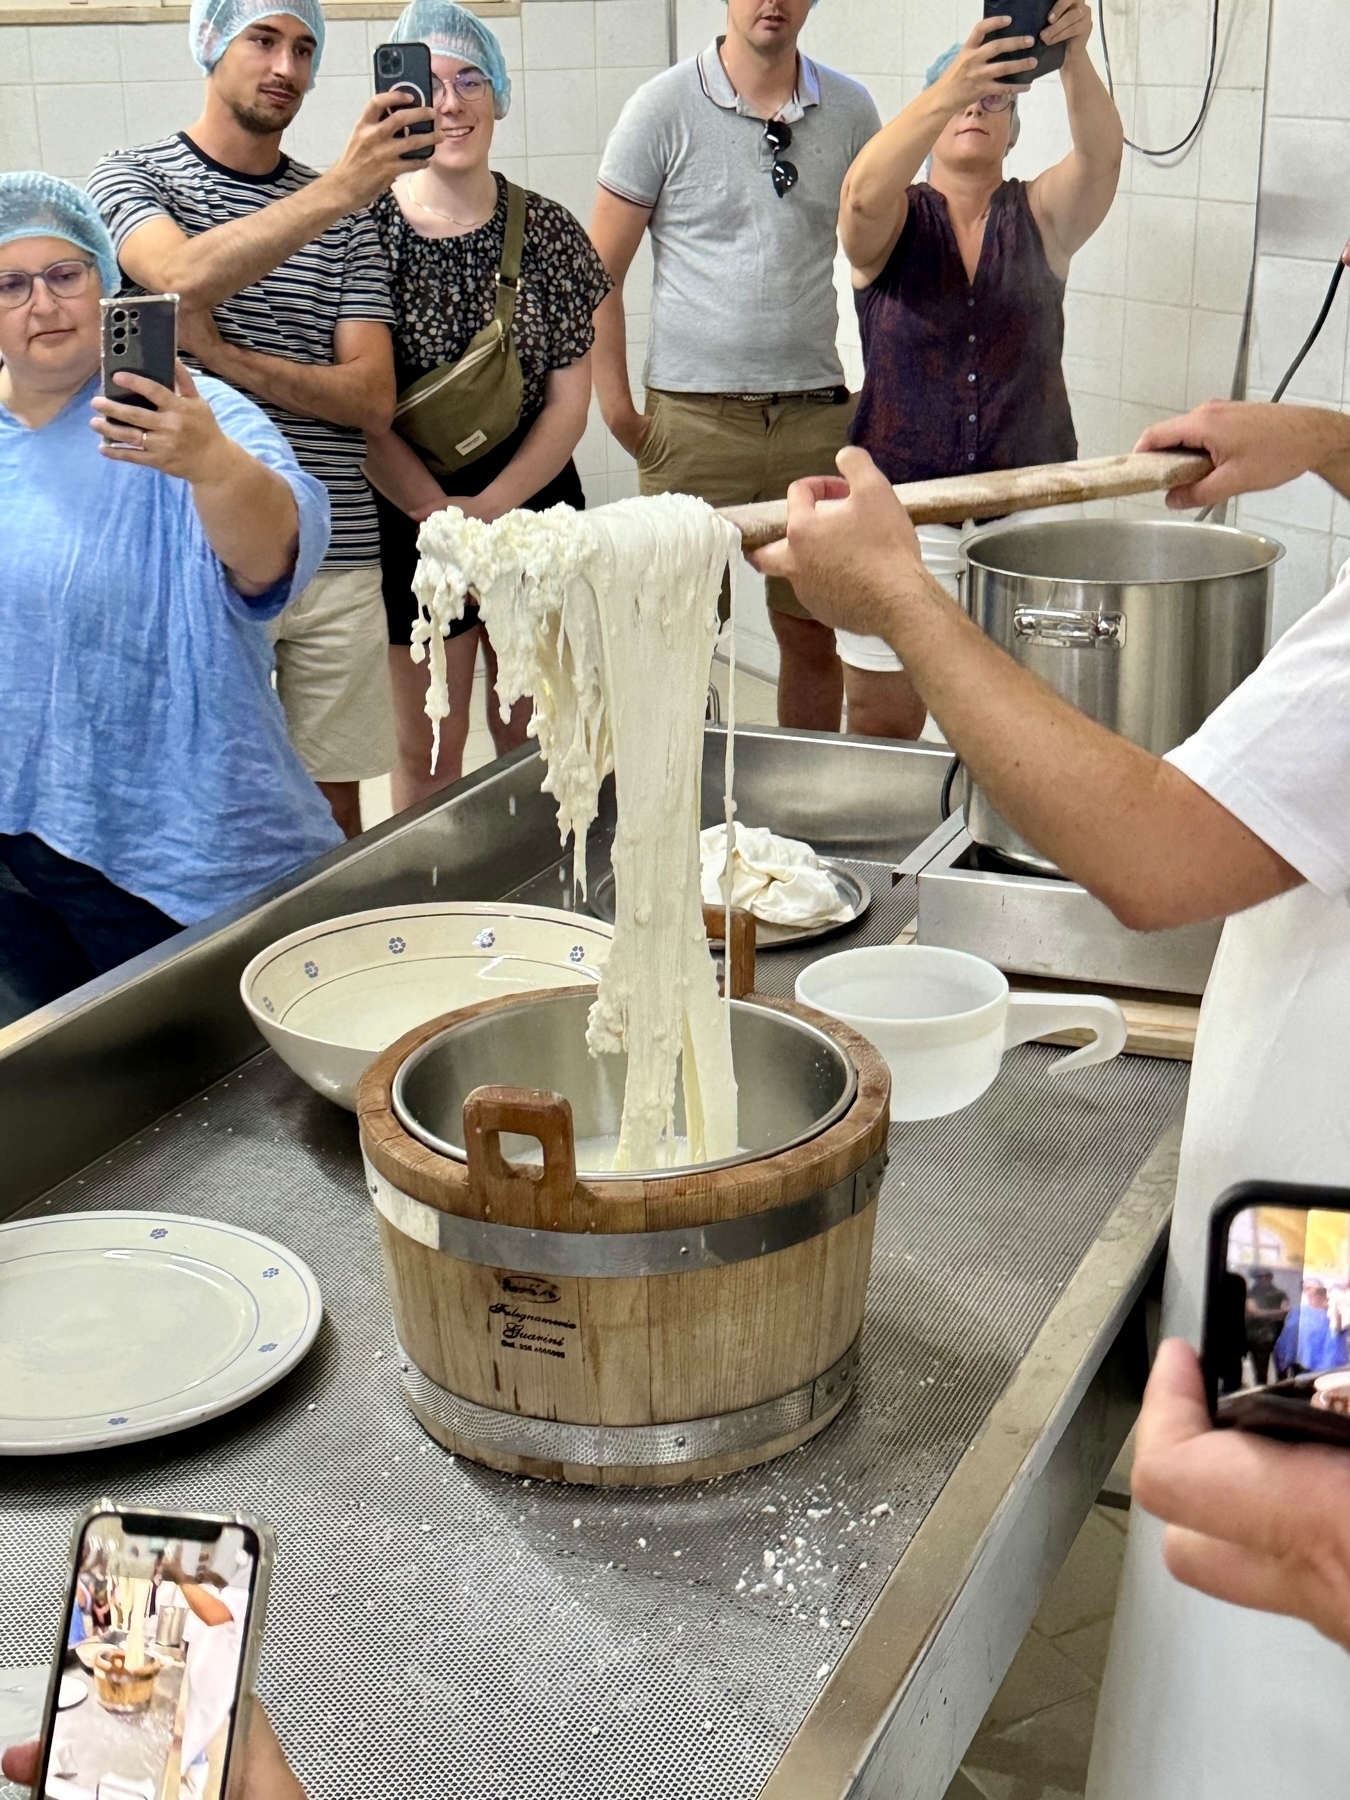 A group of people wearing hairnets are observing and capturing photos and videos of a cheese-making process. A person is lifting a large, stretchy mass of curd from a wooden vat using a long wooden stick.